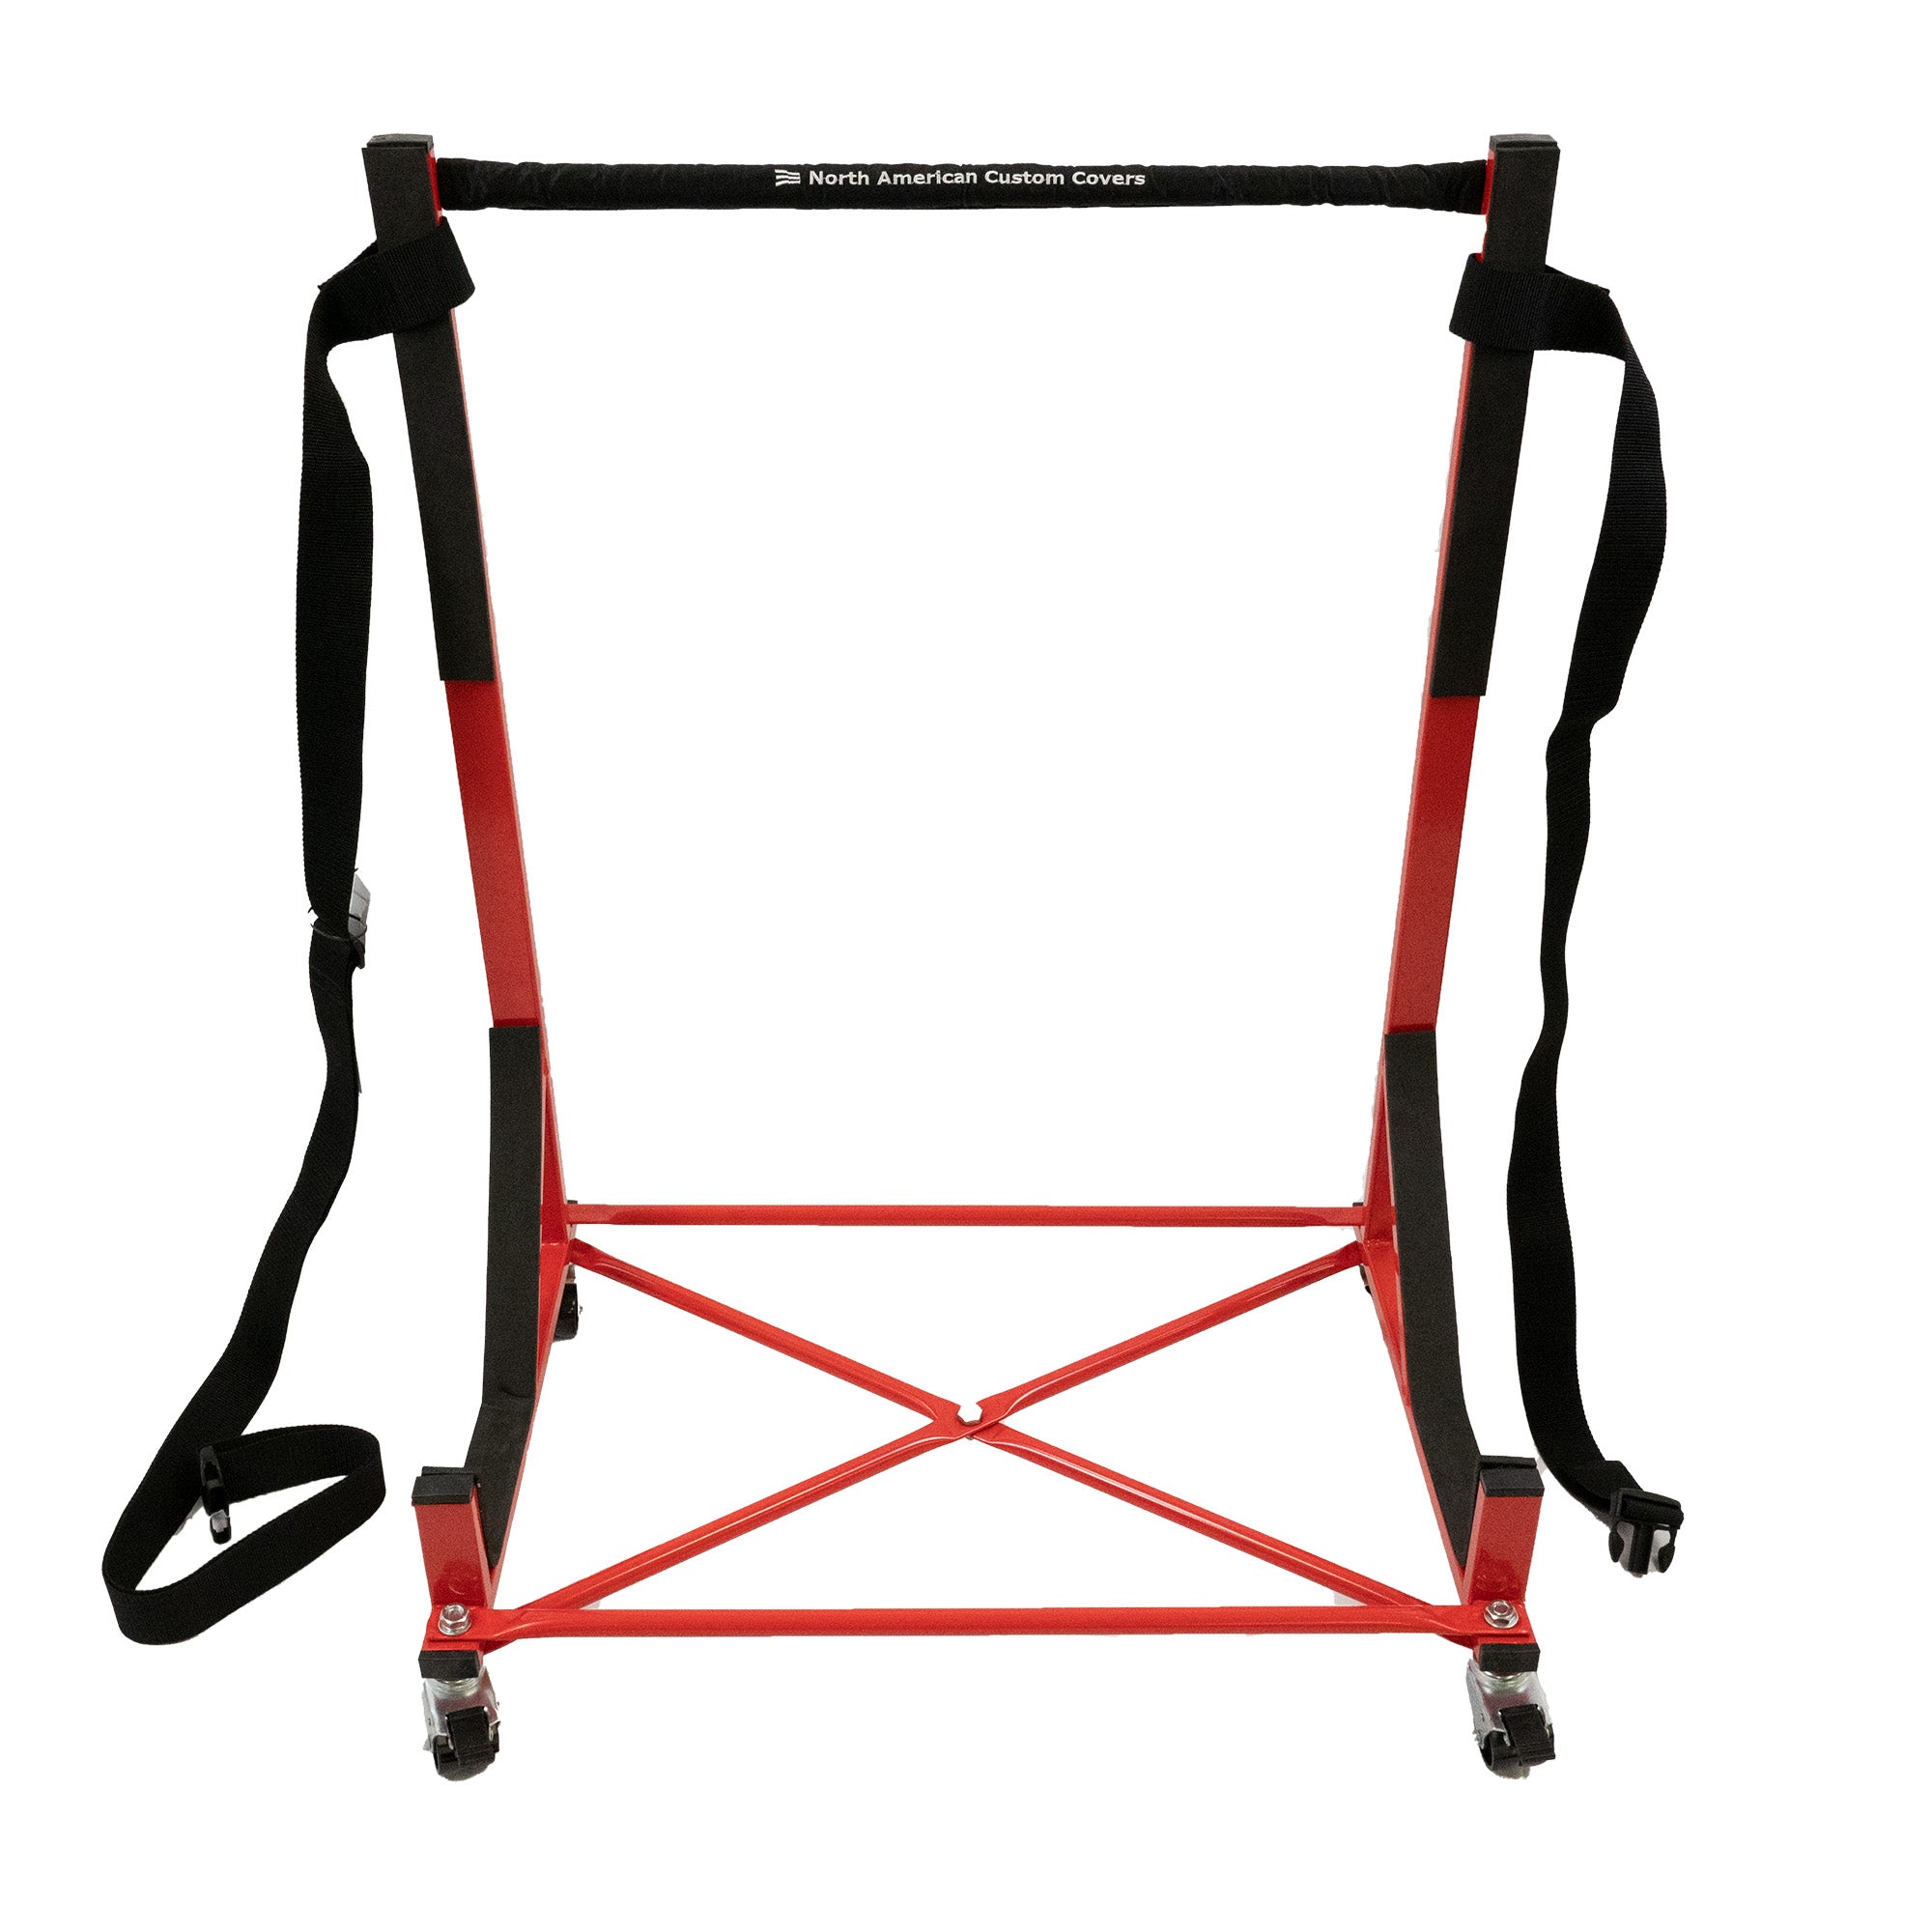 Porsche Boxster 987 Heavy-duty Hardtop Stand Trolley Cart Rack (Red) with Securing Harness and Hard Top Dust Cover (050R)